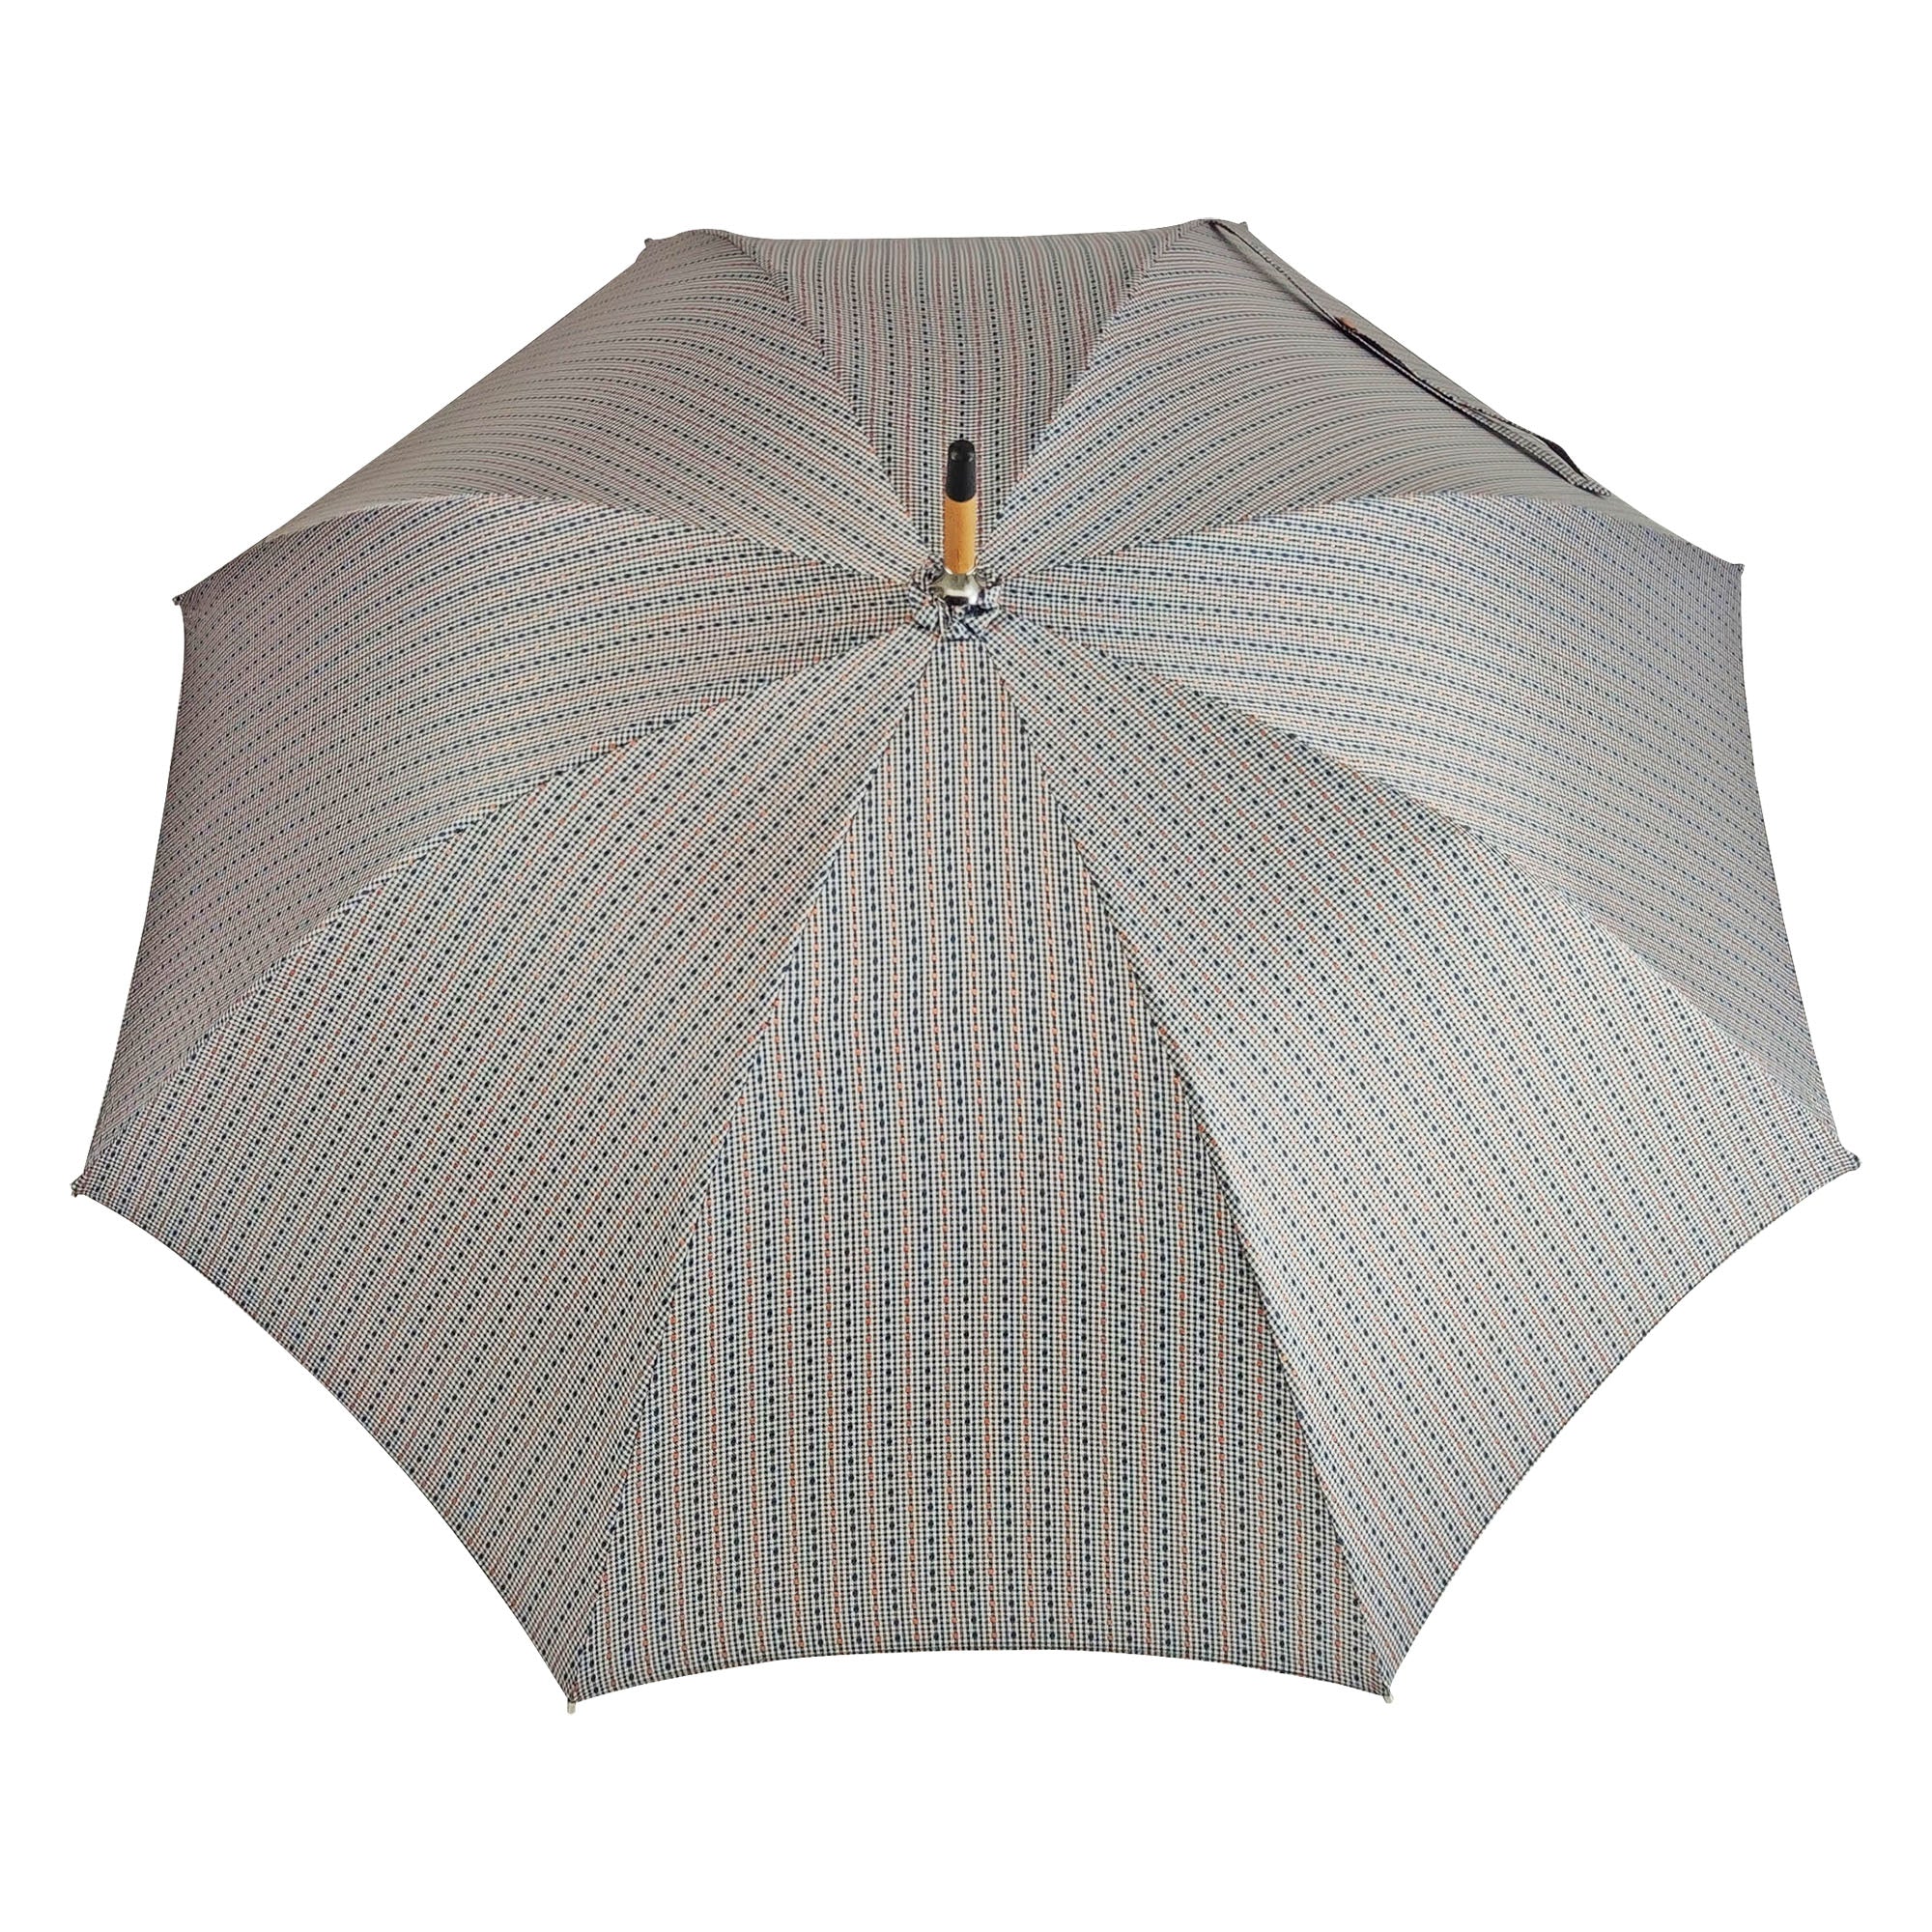 Umbrella with handle in peeled chestnut